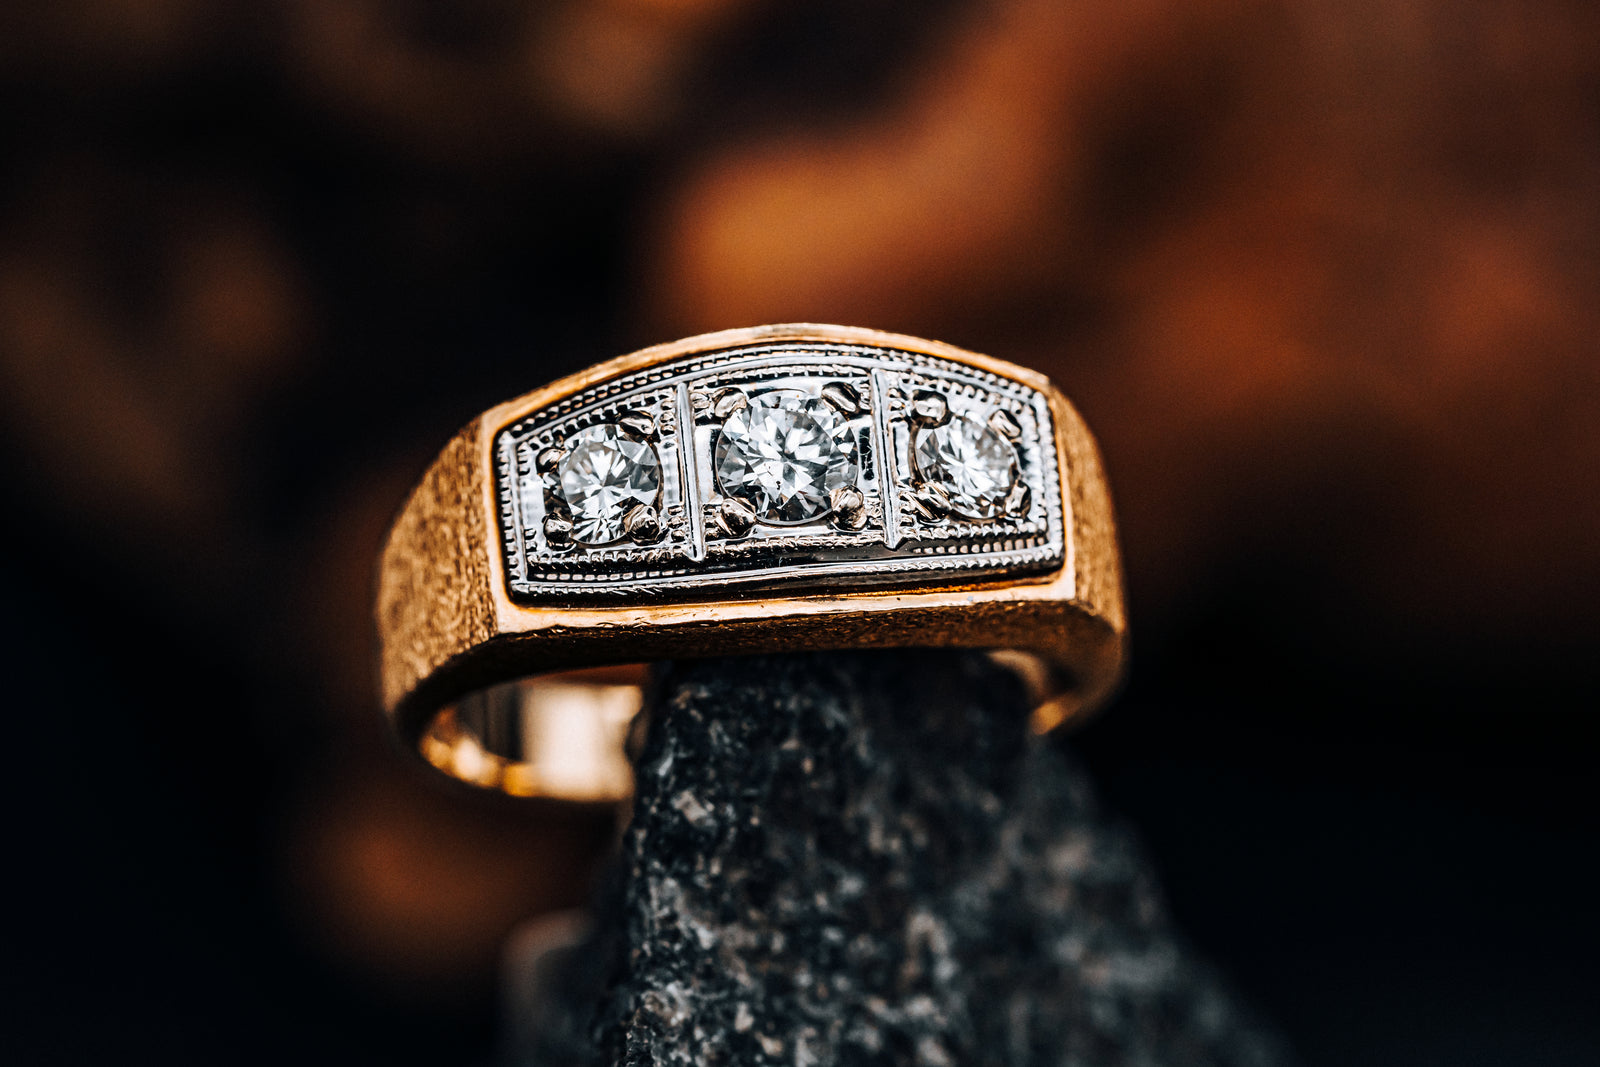 Antique 2 Ct Diamond Medieval Style Men's Rings - Antique Jewelry | Vintage  Rings | Faberge EggsAntique Jewelry | Vintage Rings | Faberge Eggs